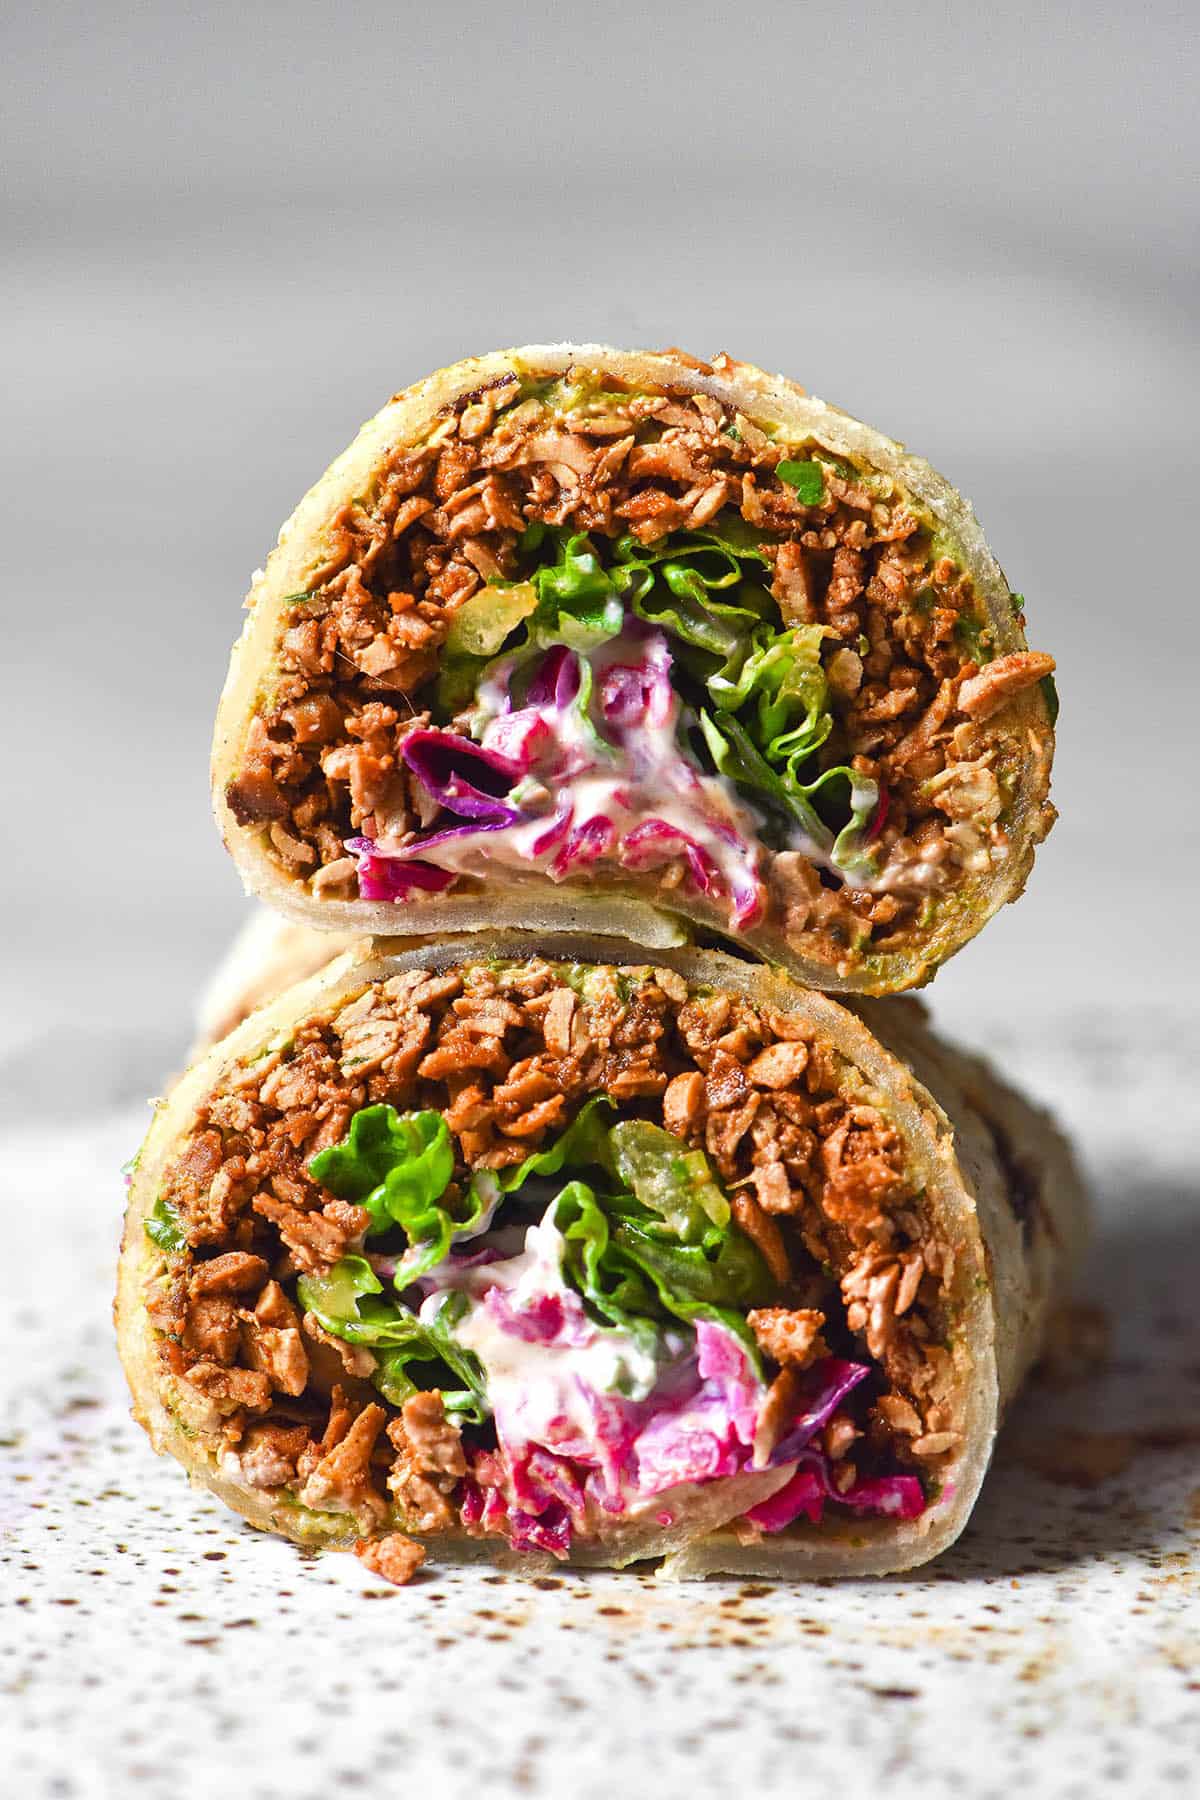 A side on image of a gluten free tortilla filled with tofu mince, pickled red cabbage, lettuce and sour cream. The burrito has been sliced in half, revealing the insides. The burrito pieces are stacked on top of one another on a white plate atop a white marble table